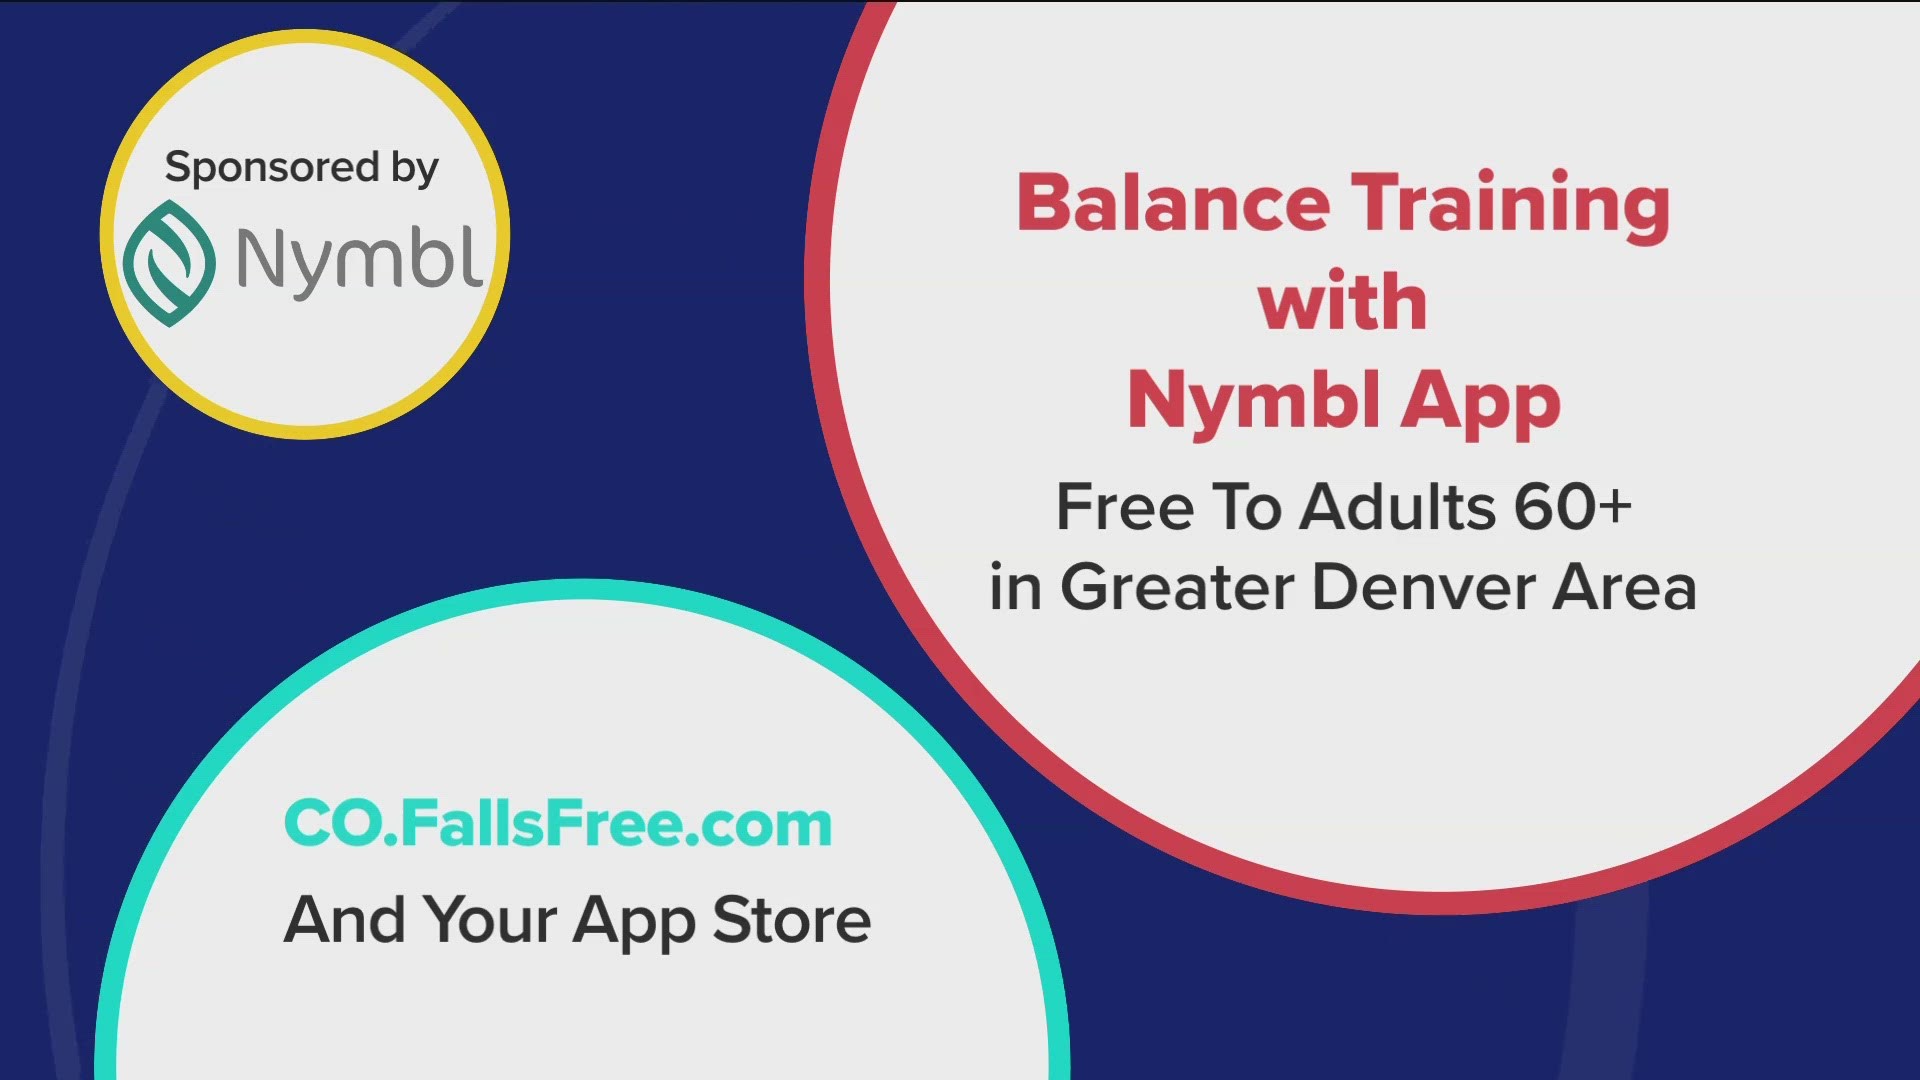 Use your smart phone or tablet to download the Nymbl Balance Training App. Enrollment takes less than 2 minutes. Visit CO.FallsFree.com. **PAID CONTENT**